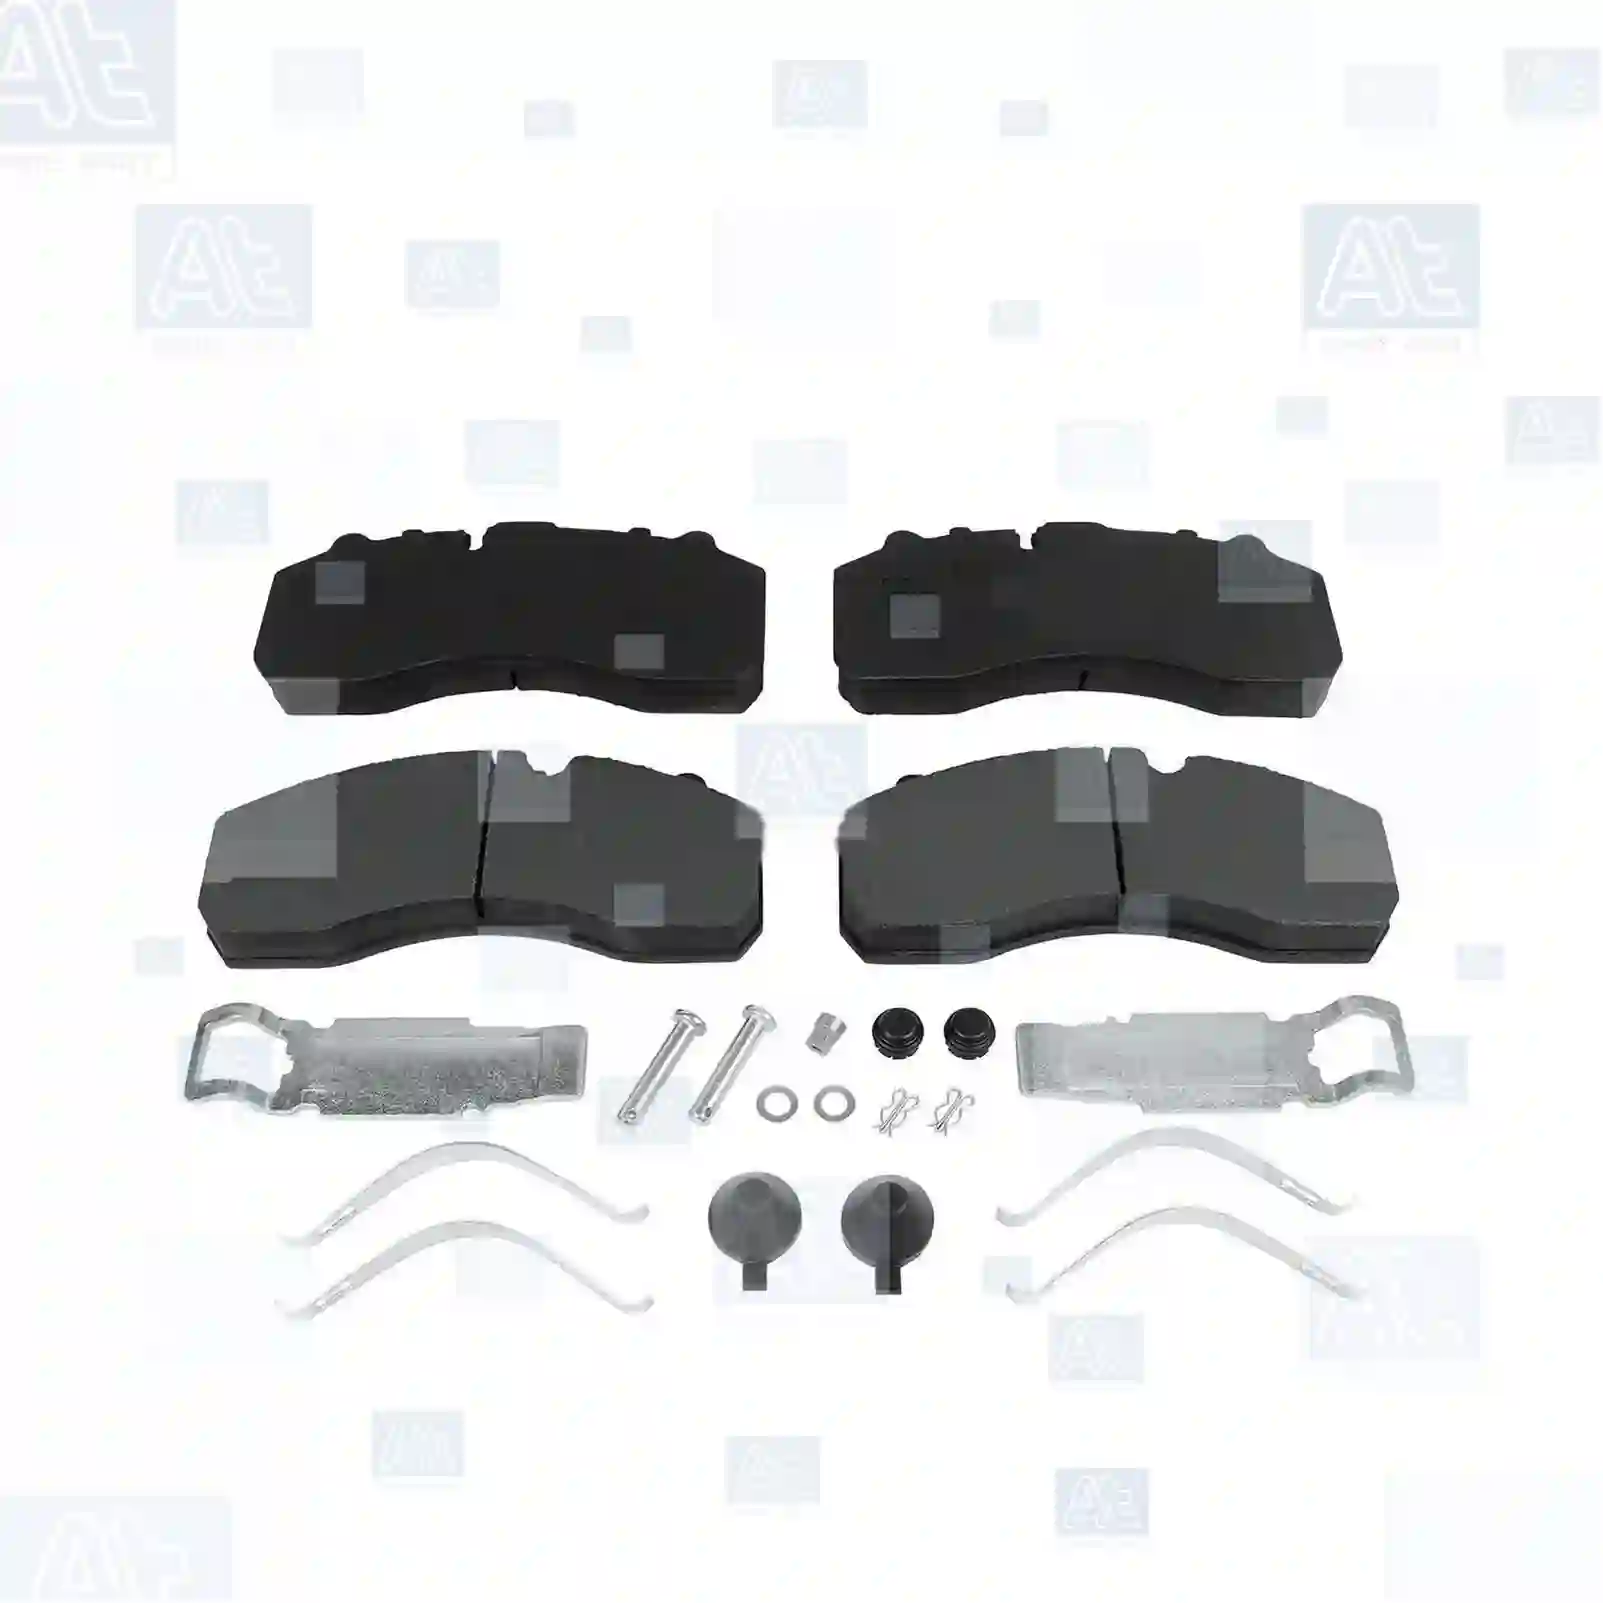 Disc brake pad kit, 77713795, 204552, 0203121400, 1433011, 1439324, 1528388, 1529336, 1617343, 1797053, 1800830, 1878030, 1962265, 1962583, 1982826, 908134, 709291037, 709317202, 9291037, 9317202, M91004502, 9291037, 01906439, 02992348, 02992476, 02995637, 02995809, 02995819, 02995820, 02995938, 02996189, 02996378, 02996515, 1906439, 2992348, 2992476, 2995637, 2995809, 2995819, 2995938, 2996189, 2996378, 2996515, 41211278, 42541062, 42567702, 42568632, 500054632, 500055167, 500086211, 99476098, JAE0250401020, JAE0250431020, 230001750, 230004283, 81508205104, 81508206030, 81508206032, 81508206033, 81508206055, 81508206056, 81508206061, 81508206070, 81508206071, N1014015973, 0004211810, 0004214310, 0024204920, 0024207720, 0034201020, 0034201620, 0034202020, 0034202220, 0034203520, 0044202220, 004420222010, 0044206020, 0064201020, 0064201120, 0084205620, 0084206020, 6264230010, 082134000, 082135100, MDP3087K, MDP9000, 3057007700, 3057007701, 3057007900, 5317002300, 5317002400, 5317002300, 5317002400, 1390428, 1415153, 1444125, 1521979, 1522633, 1527633, 1734529, 1856108, 1890860, 1890861, 1914100, 2121537, 2325212, 2325213, 2920101, 521979, 017251, 017927, 8285000571, 8285500571, 8285515554, 8285515573, 11022968, 350101533, ZG50420-0008 ||  77713795 At Spare Part | Engine, Accelerator Pedal, Camshaft, Connecting Rod, Crankcase, Crankshaft, Cylinder Head, Engine Suspension Mountings, Exhaust Manifold, Exhaust Gas Recirculation, Filter Kits, Flywheel Housing, General Overhaul Kits, Engine, Intake Manifold, Oil Cleaner, Oil Cooler, Oil Filter, Oil Pump, Oil Sump, Piston & Liner, Sensor & Switch, Timing Case, Turbocharger, Cooling System, Belt Tensioner, Coolant Filter, Coolant Pipe, Corrosion Prevention Agent, Drive, Expansion Tank, Fan, Intercooler, Monitors & Gauges, Radiator, Thermostat, V-Belt / Timing belt, Water Pump, Fuel System, Electronical Injector Unit, Feed Pump, Fuel Filter, cpl., Fuel Gauge Sender,  Fuel Line, Fuel Pump, Fuel Tank, Injection Line Kit, Injection Pump, Exhaust System, Clutch & Pedal, Gearbox, Propeller Shaft, Axles, Brake System, Hubs & Wheels, Suspension, Leaf Spring, Universal Parts / Accessories, Steering, Electrical System, Cabin Disc brake pad kit, 77713795, 204552, 0203121400, 1433011, 1439324, 1528388, 1529336, 1617343, 1797053, 1800830, 1878030, 1962265, 1962583, 1982826, 908134, 709291037, 709317202, 9291037, 9317202, M91004502, 9291037, 01906439, 02992348, 02992476, 02995637, 02995809, 02995819, 02995820, 02995938, 02996189, 02996378, 02996515, 1906439, 2992348, 2992476, 2995637, 2995809, 2995819, 2995938, 2996189, 2996378, 2996515, 41211278, 42541062, 42567702, 42568632, 500054632, 500055167, 500086211, 99476098, JAE0250401020, JAE0250431020, 230001750, 230004283, 81508205104, 81508206030, 81508206032, 81508206033, 81508206055, 81508206056, 81508206061, 81508206070, 81508206071, N1014015973, 0004211810, 0004214310, 0024204920, 0024207720, 0034201020, 0034201620, 0034202020, 0034202220, 0034203520, 0044202220, 004420222010, 0044206020, 0064201020, 0064201120, 0084205620, 0084206020, 6264230010, 082134000, 082135100, MDP3087K, MDP9000, 3057007700, 3057007701, 3057007900, 5317002300, 5317002400, 5317002300, 5317002400, 1390428, 1415153, 1444125, 1521979, 1522633, 1527633, 1734529, 1856108, 1890860, 1890861, 1914100, 2121537, 2325212, 2325213, 2920101, 521979, 017251, 017927, 8285000571, 8285500571, 8285515554, 8285515573, 11022968, 350101533, ZG50420-0008 ||  77713795 At Spare Part | Engine, Accelerator Pedal, Camshaft, Connecting Rod, Crankcase, Crankshaft, Cylinder Head, Engine Suspension Mountings, Exhaust Manifold, Exhaust Gas Recirculation, Filter Kits, Flywheel Housing, General Overhaul Kits, Engine, Intake Manifold, Oil Cleaner, Oil Cooler, Oil Filter, Oil Pump, Oil Sump, Piston & Liner, Sensor & Switch, Timing Case, Turbocharger, Cooling System, Belt Tensioner, Coolant Filter, Coolant Pipe, Corrosion Prevention Agent, Drive, Expansion Tank, Fan, Intercooler, Monitors & Gauges, Radiator, Thermostat, V-Belt / Timing belt, Water Pump, Fuel System, Electronical Injector Unit, Feed Pump, Fuel Filter, cpl., Fuel Gauge Sender,  Fuel Line, Fuel Pump, Fuel Tank, Injection Line Kit, Injection Pump, Exhaust System, Clutch & Pedal, Gearbox, Propeller Shaft, Axles, Brake System, Hubs & Wheels, Suspension, Leaf Spring, Universal Parts / Accessories, Steering, Electrical System, Cabin